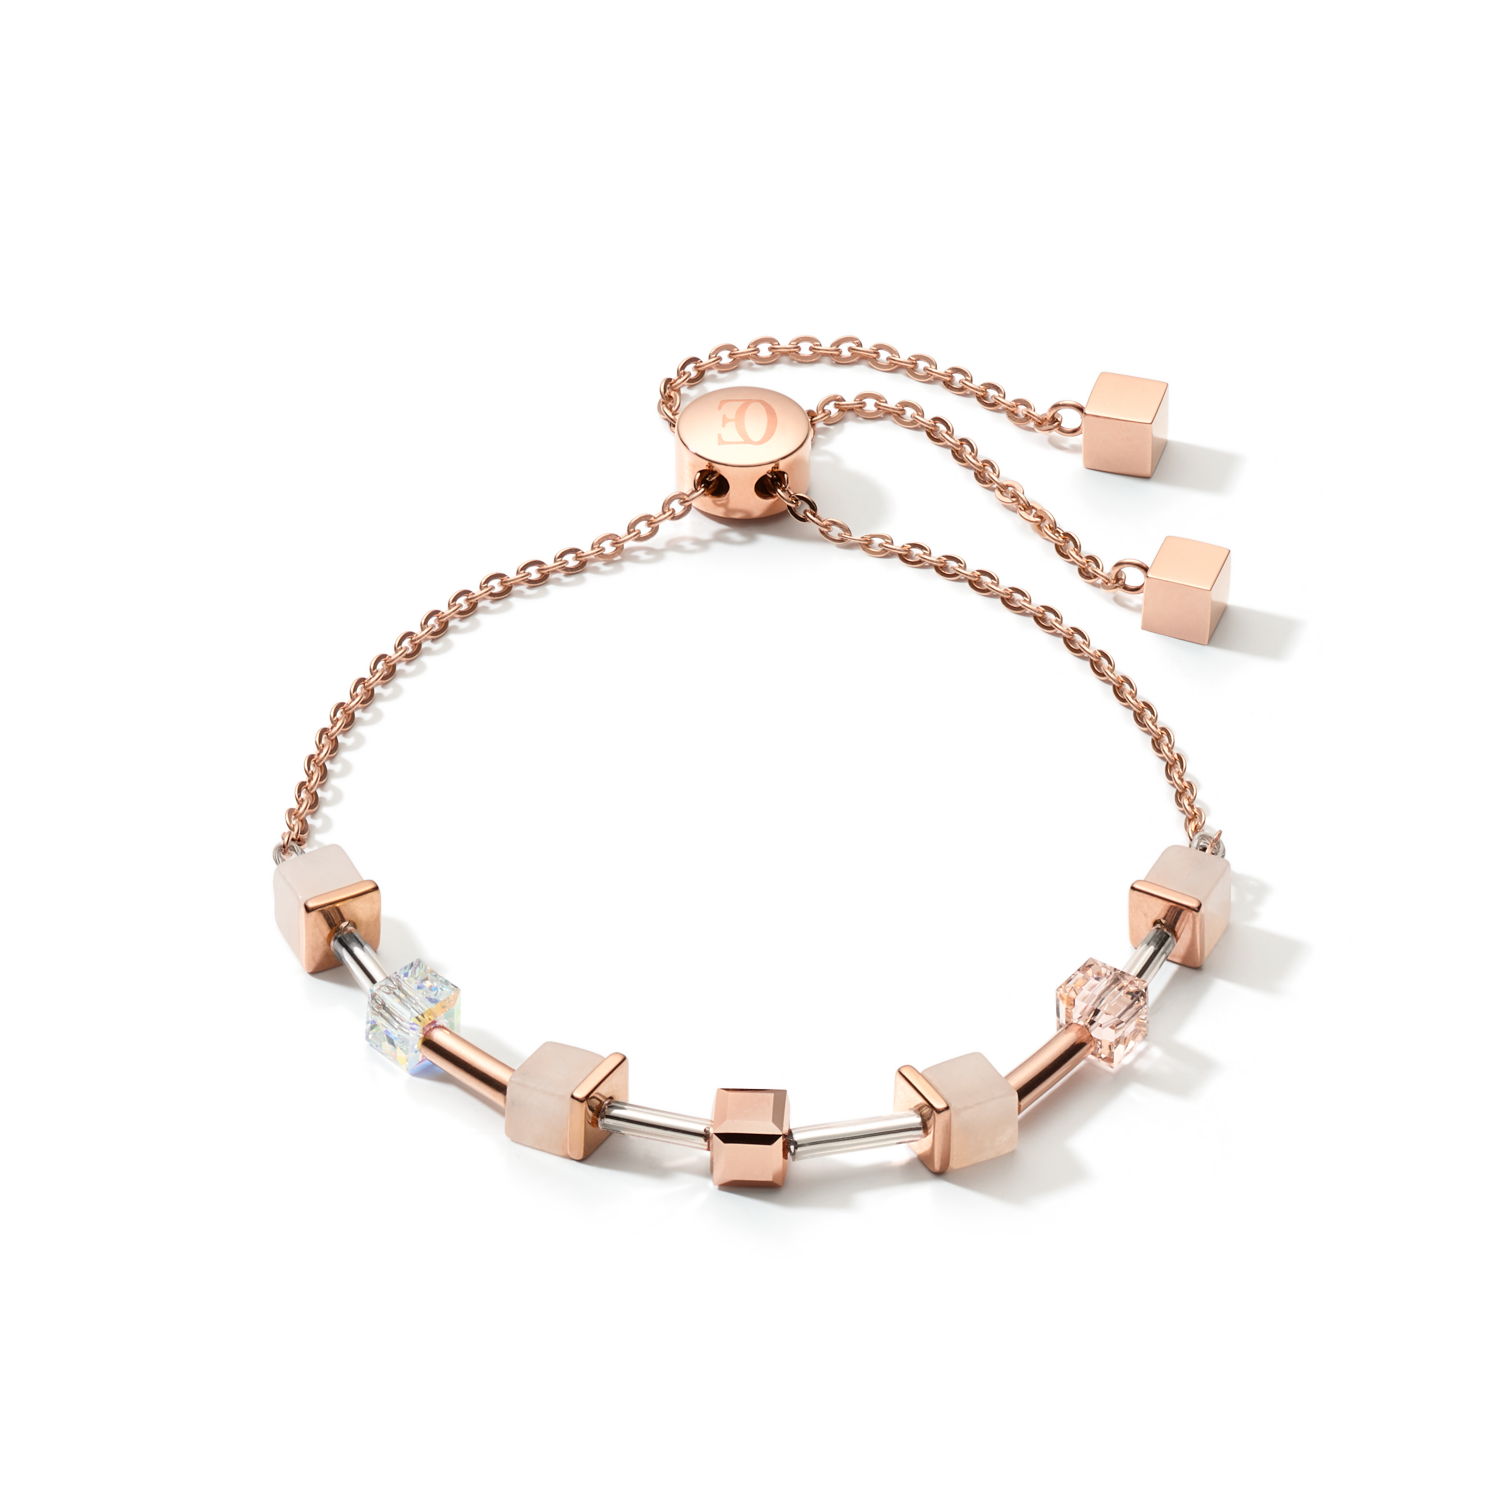 Steff Grey Cord Friendship Bracelet with Rose Gold Vermeil Wing Charm from  Steffans jewellers  Steff Jewellery